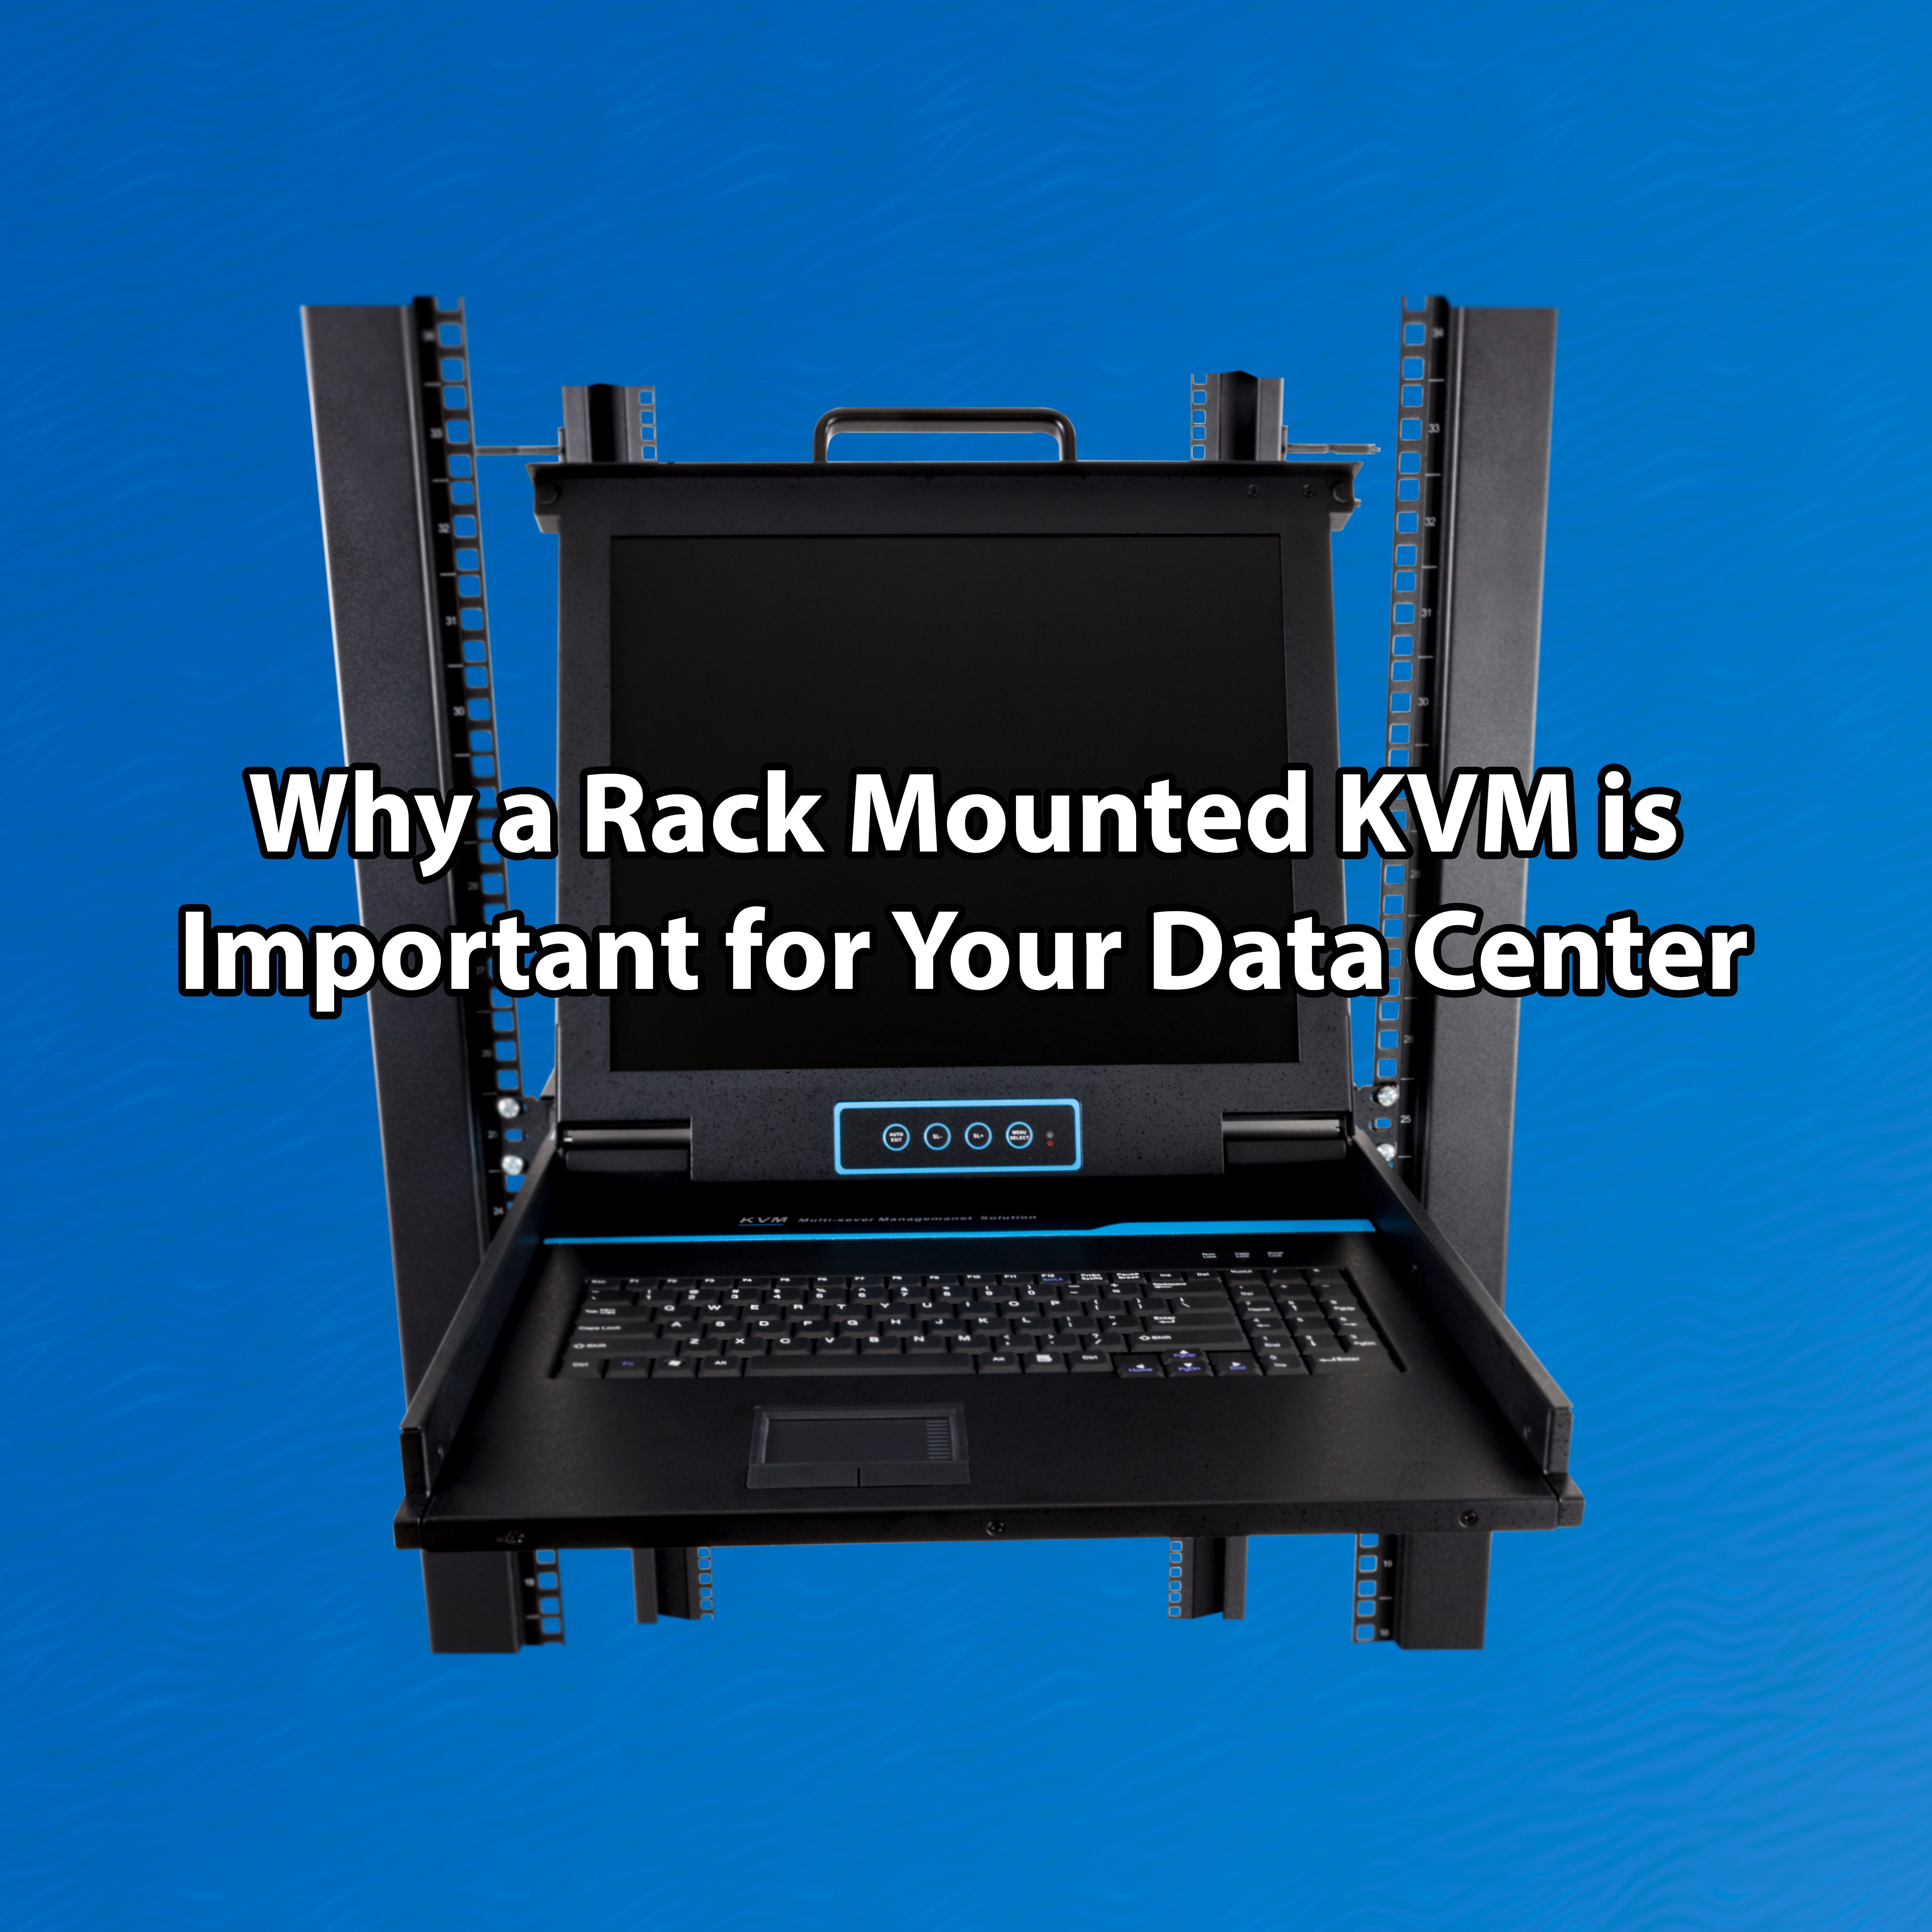 Why a Rack Mounted KVM is Important for Your Data Center